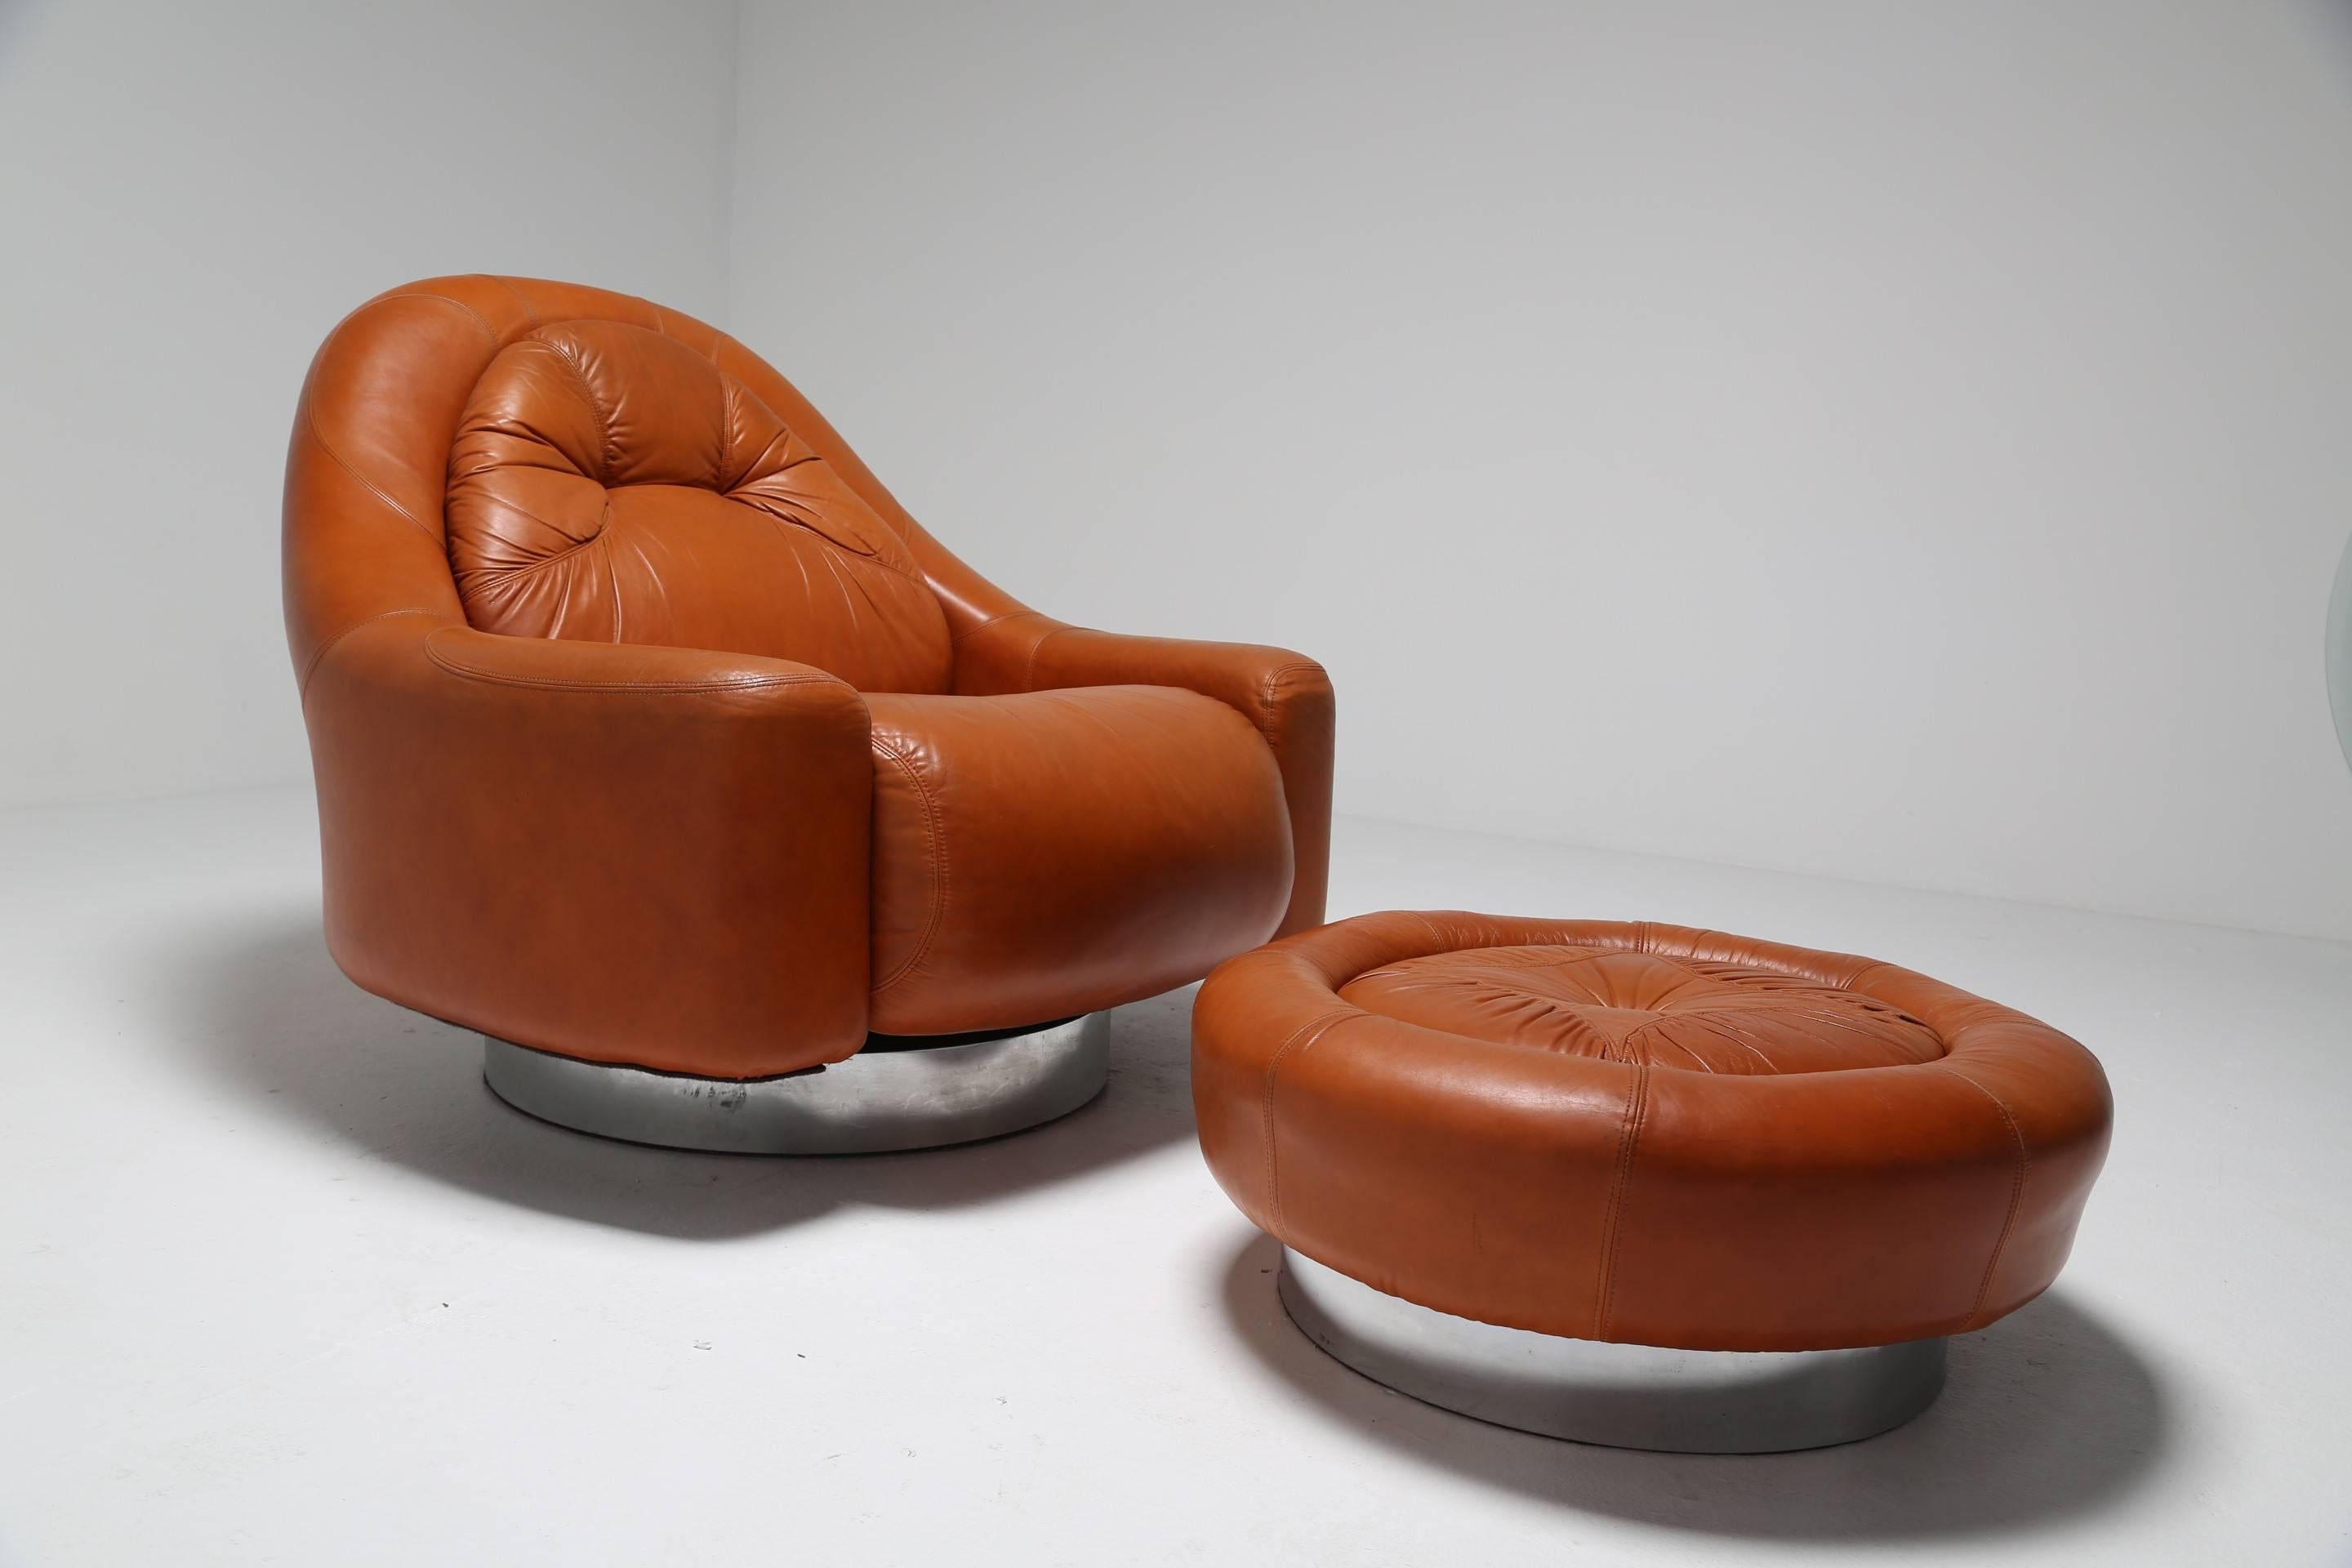 Guido Faleschini designed this supremely comfortable lounge chair and ottoman. Produced by Mairani for Pace in the late 1970s-early 1980s and made from soft but durable tan leather on a steel base. There is no doubt that this seating combination